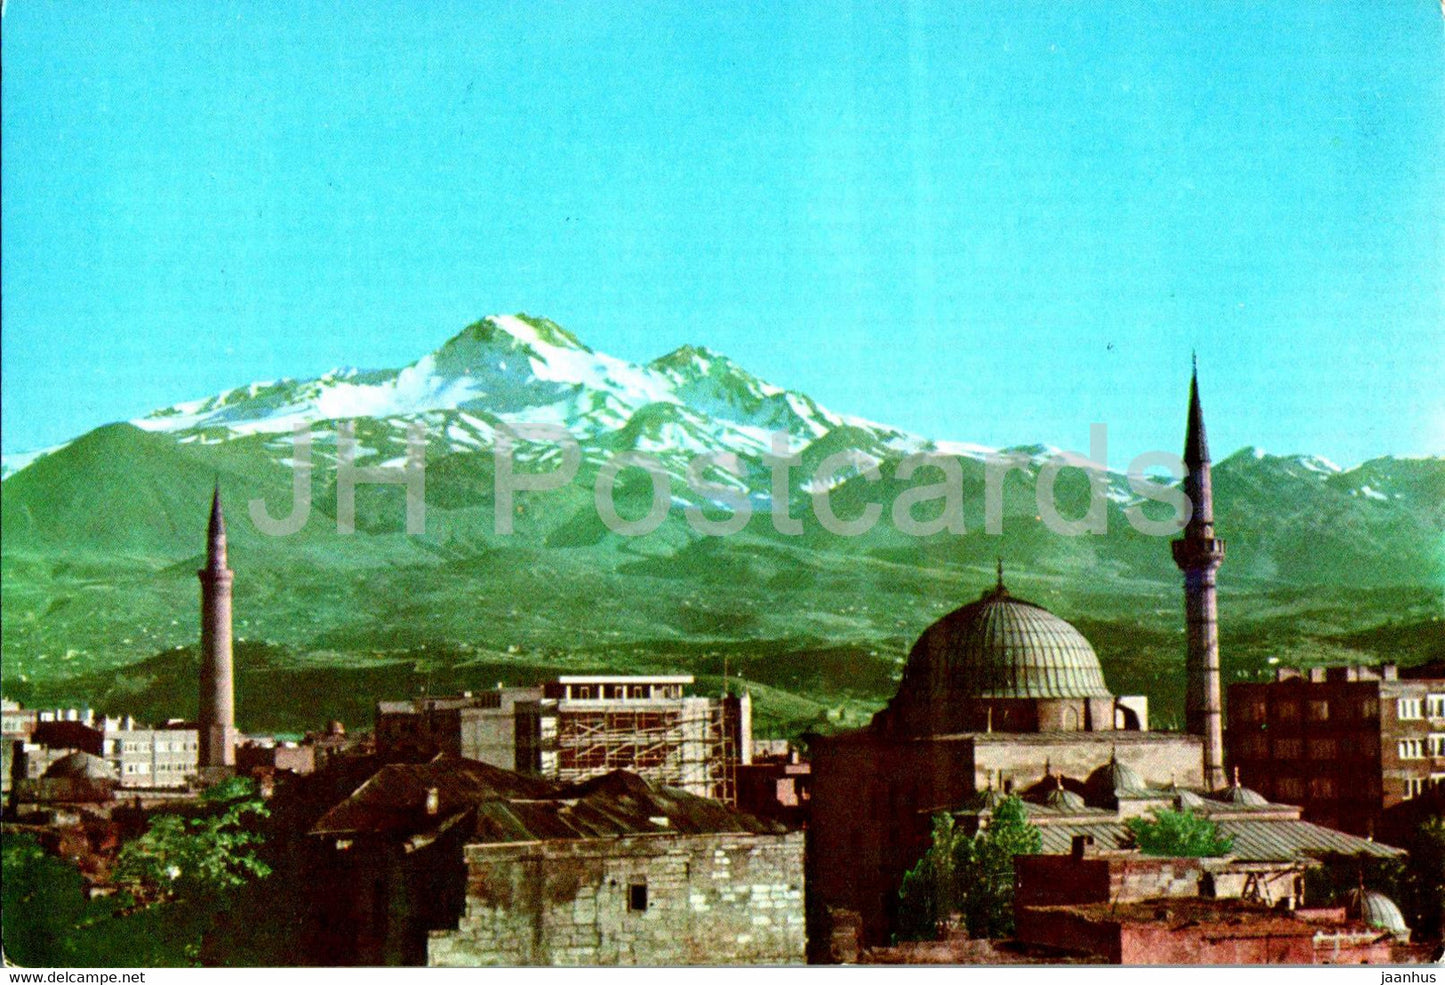 Kayseri - A view from the City - 38-45 - Turkey - unused - JH Postcards